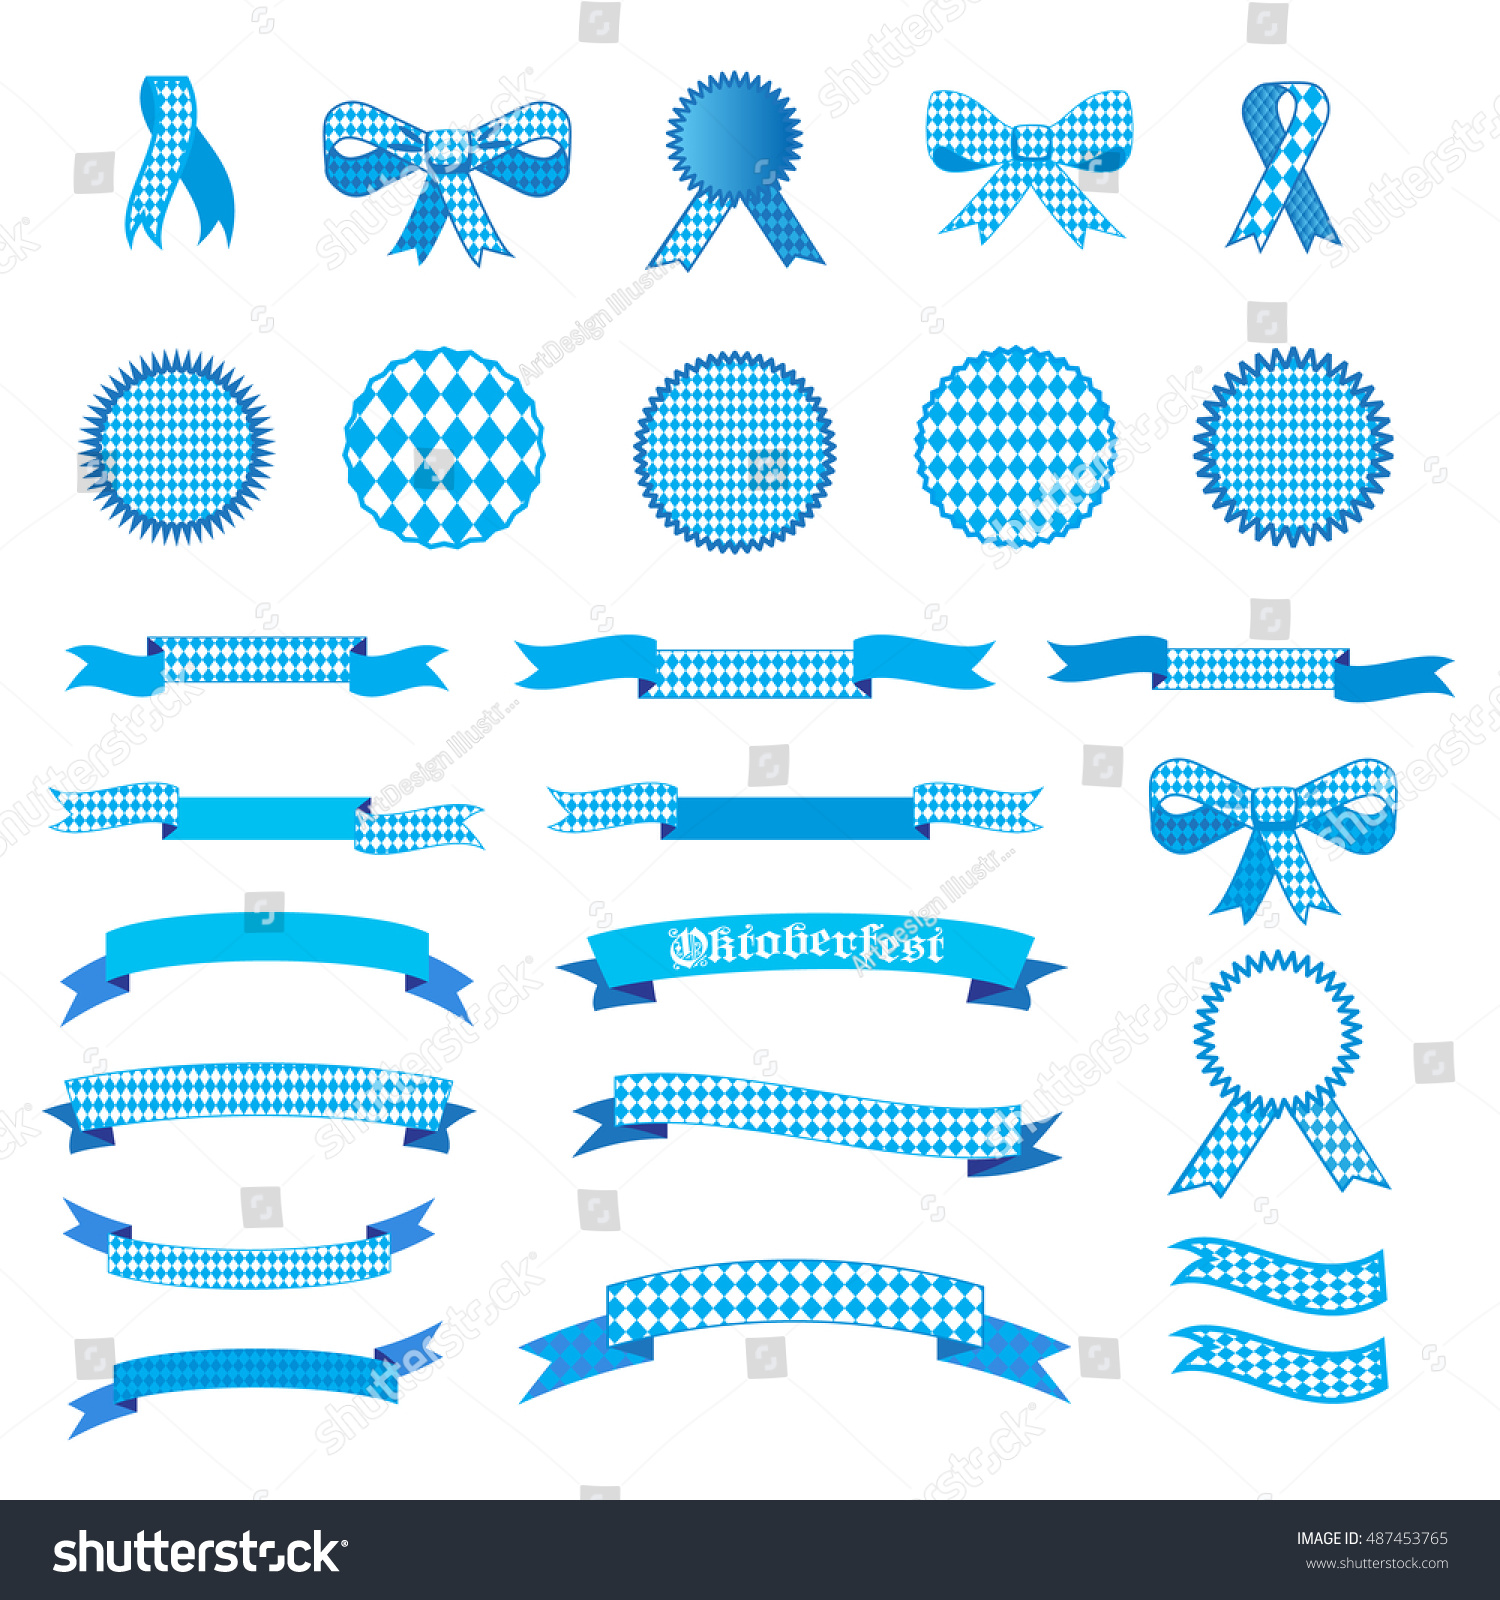 Oktoberfest Holiday Set Ribbons Labels Banners Stock Vector (Royalty ...